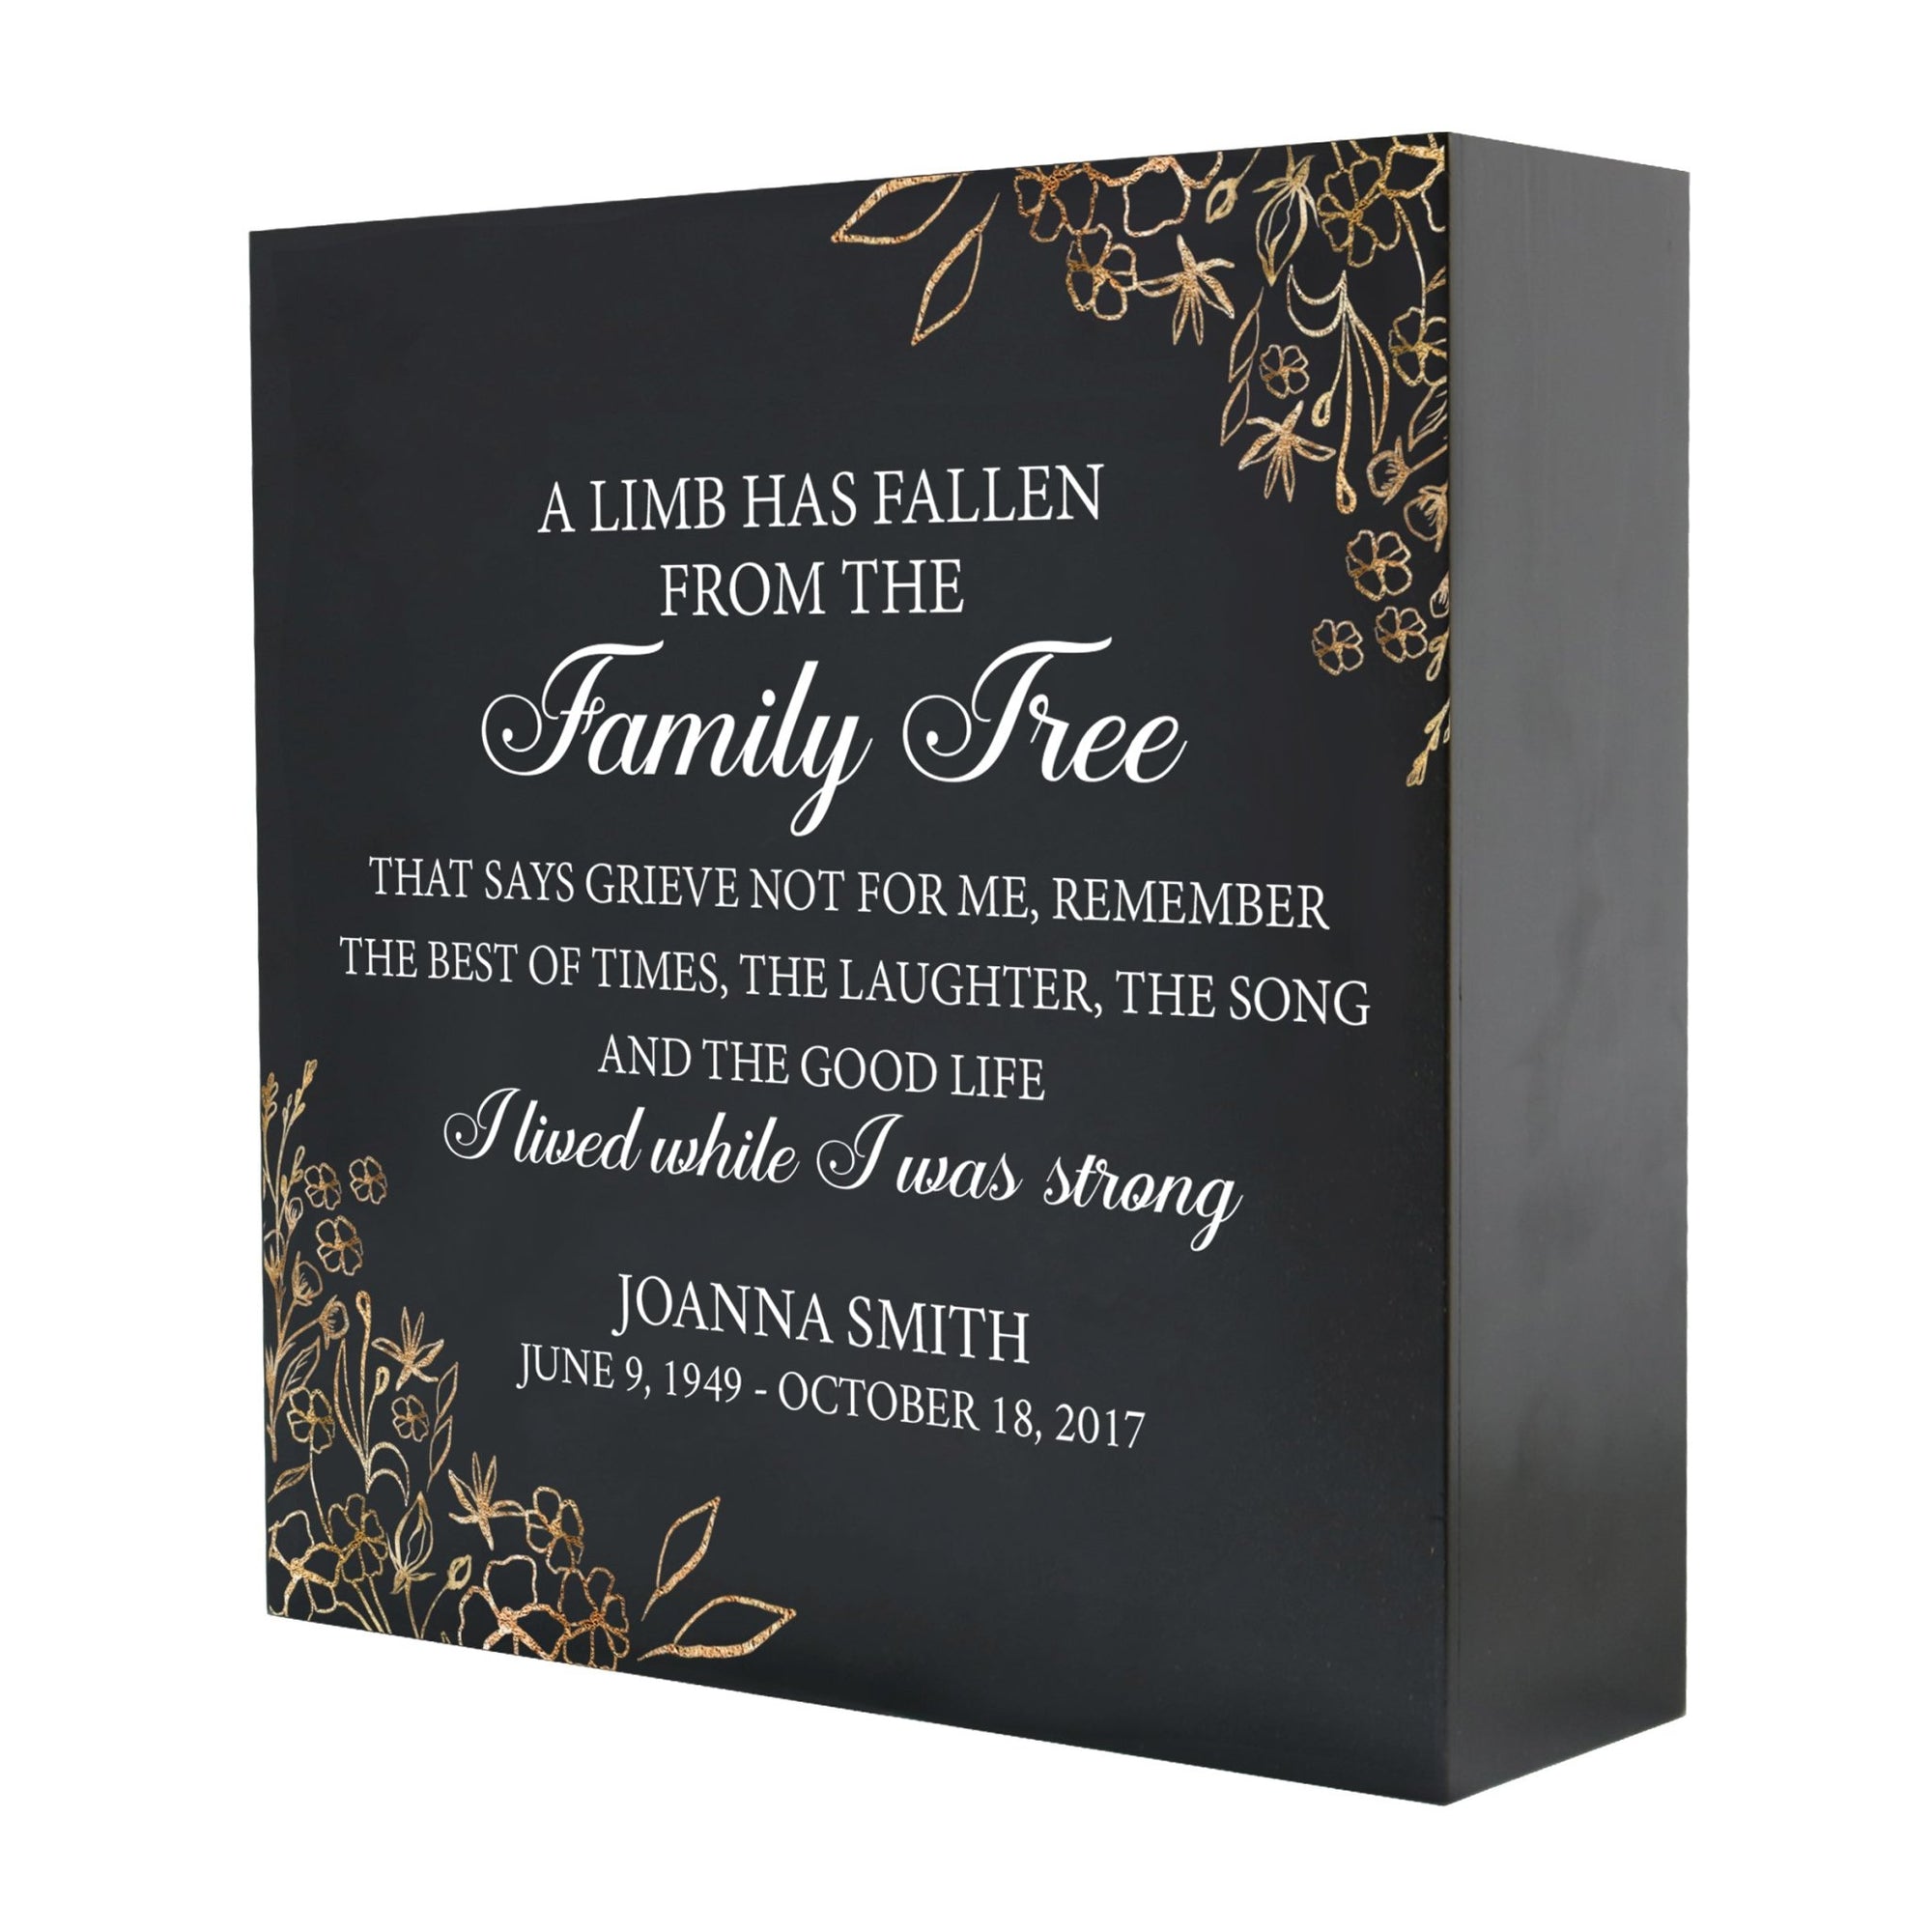 Personalized Modern Inspirational Memorial Wooden Shadow Box and Urn 10x10 holds 189 cu in of Human Ashes - A Limb Has Fallen (Life) - LifeSong Milestones